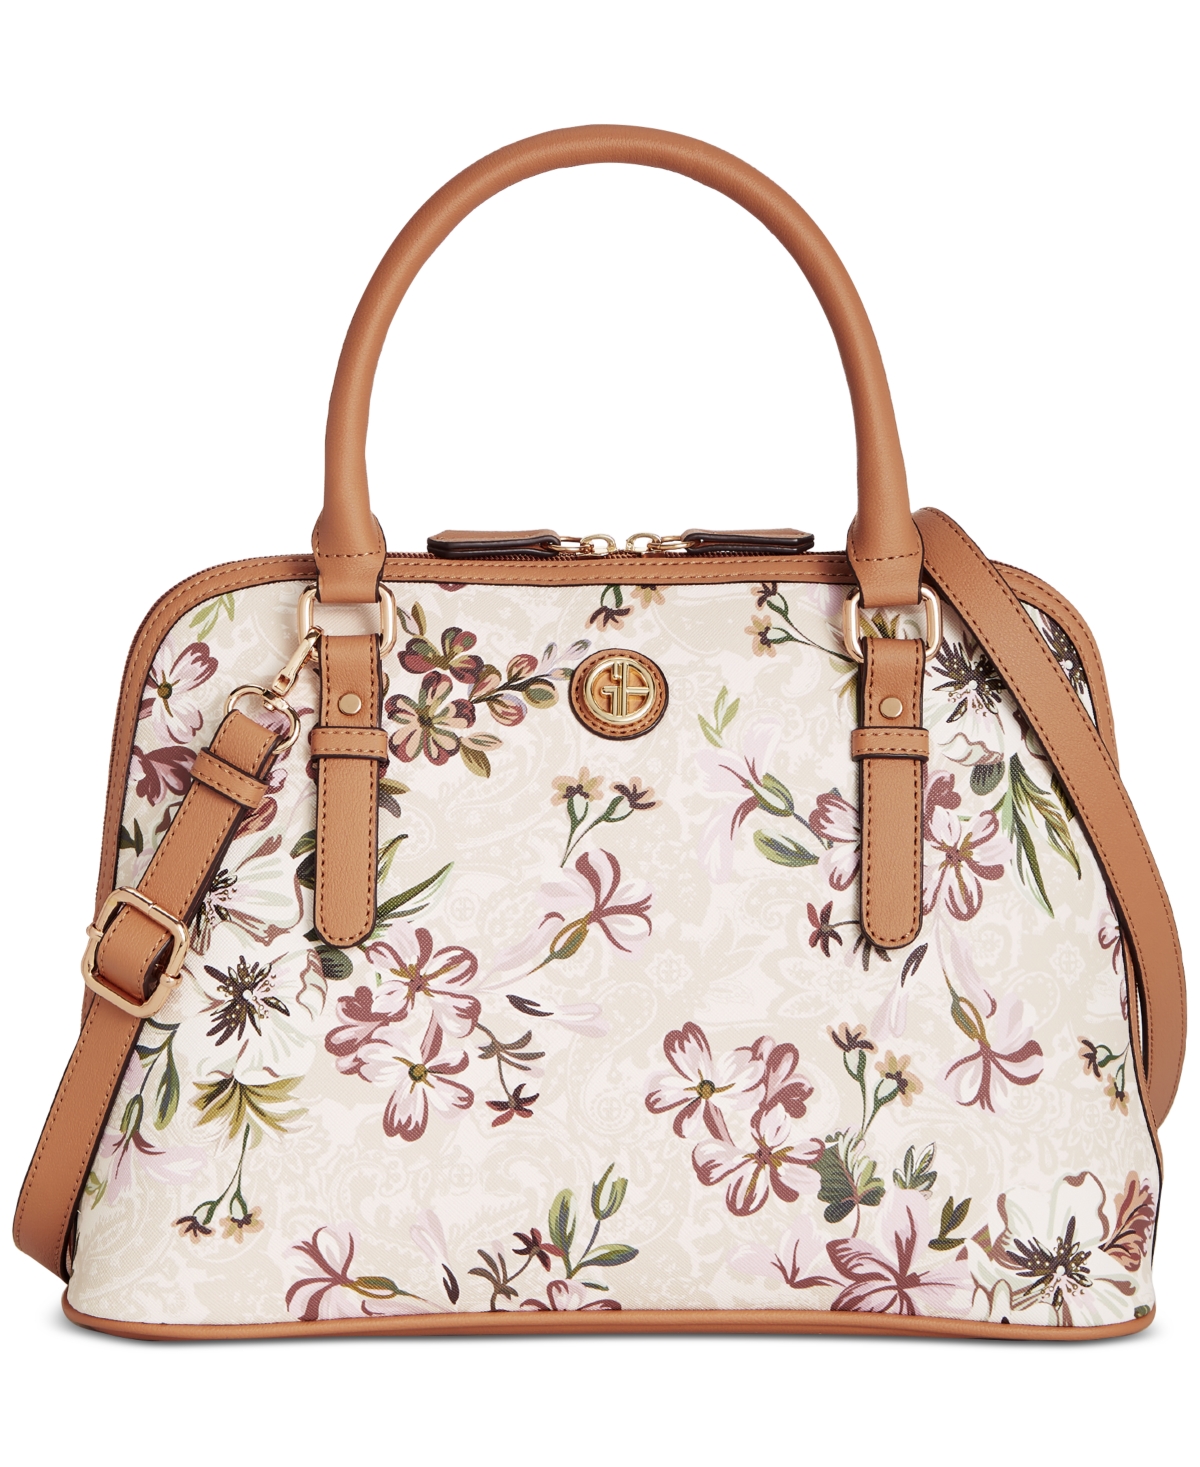 Floral Dome Satchel, Created for Macy's - Neutral Floral